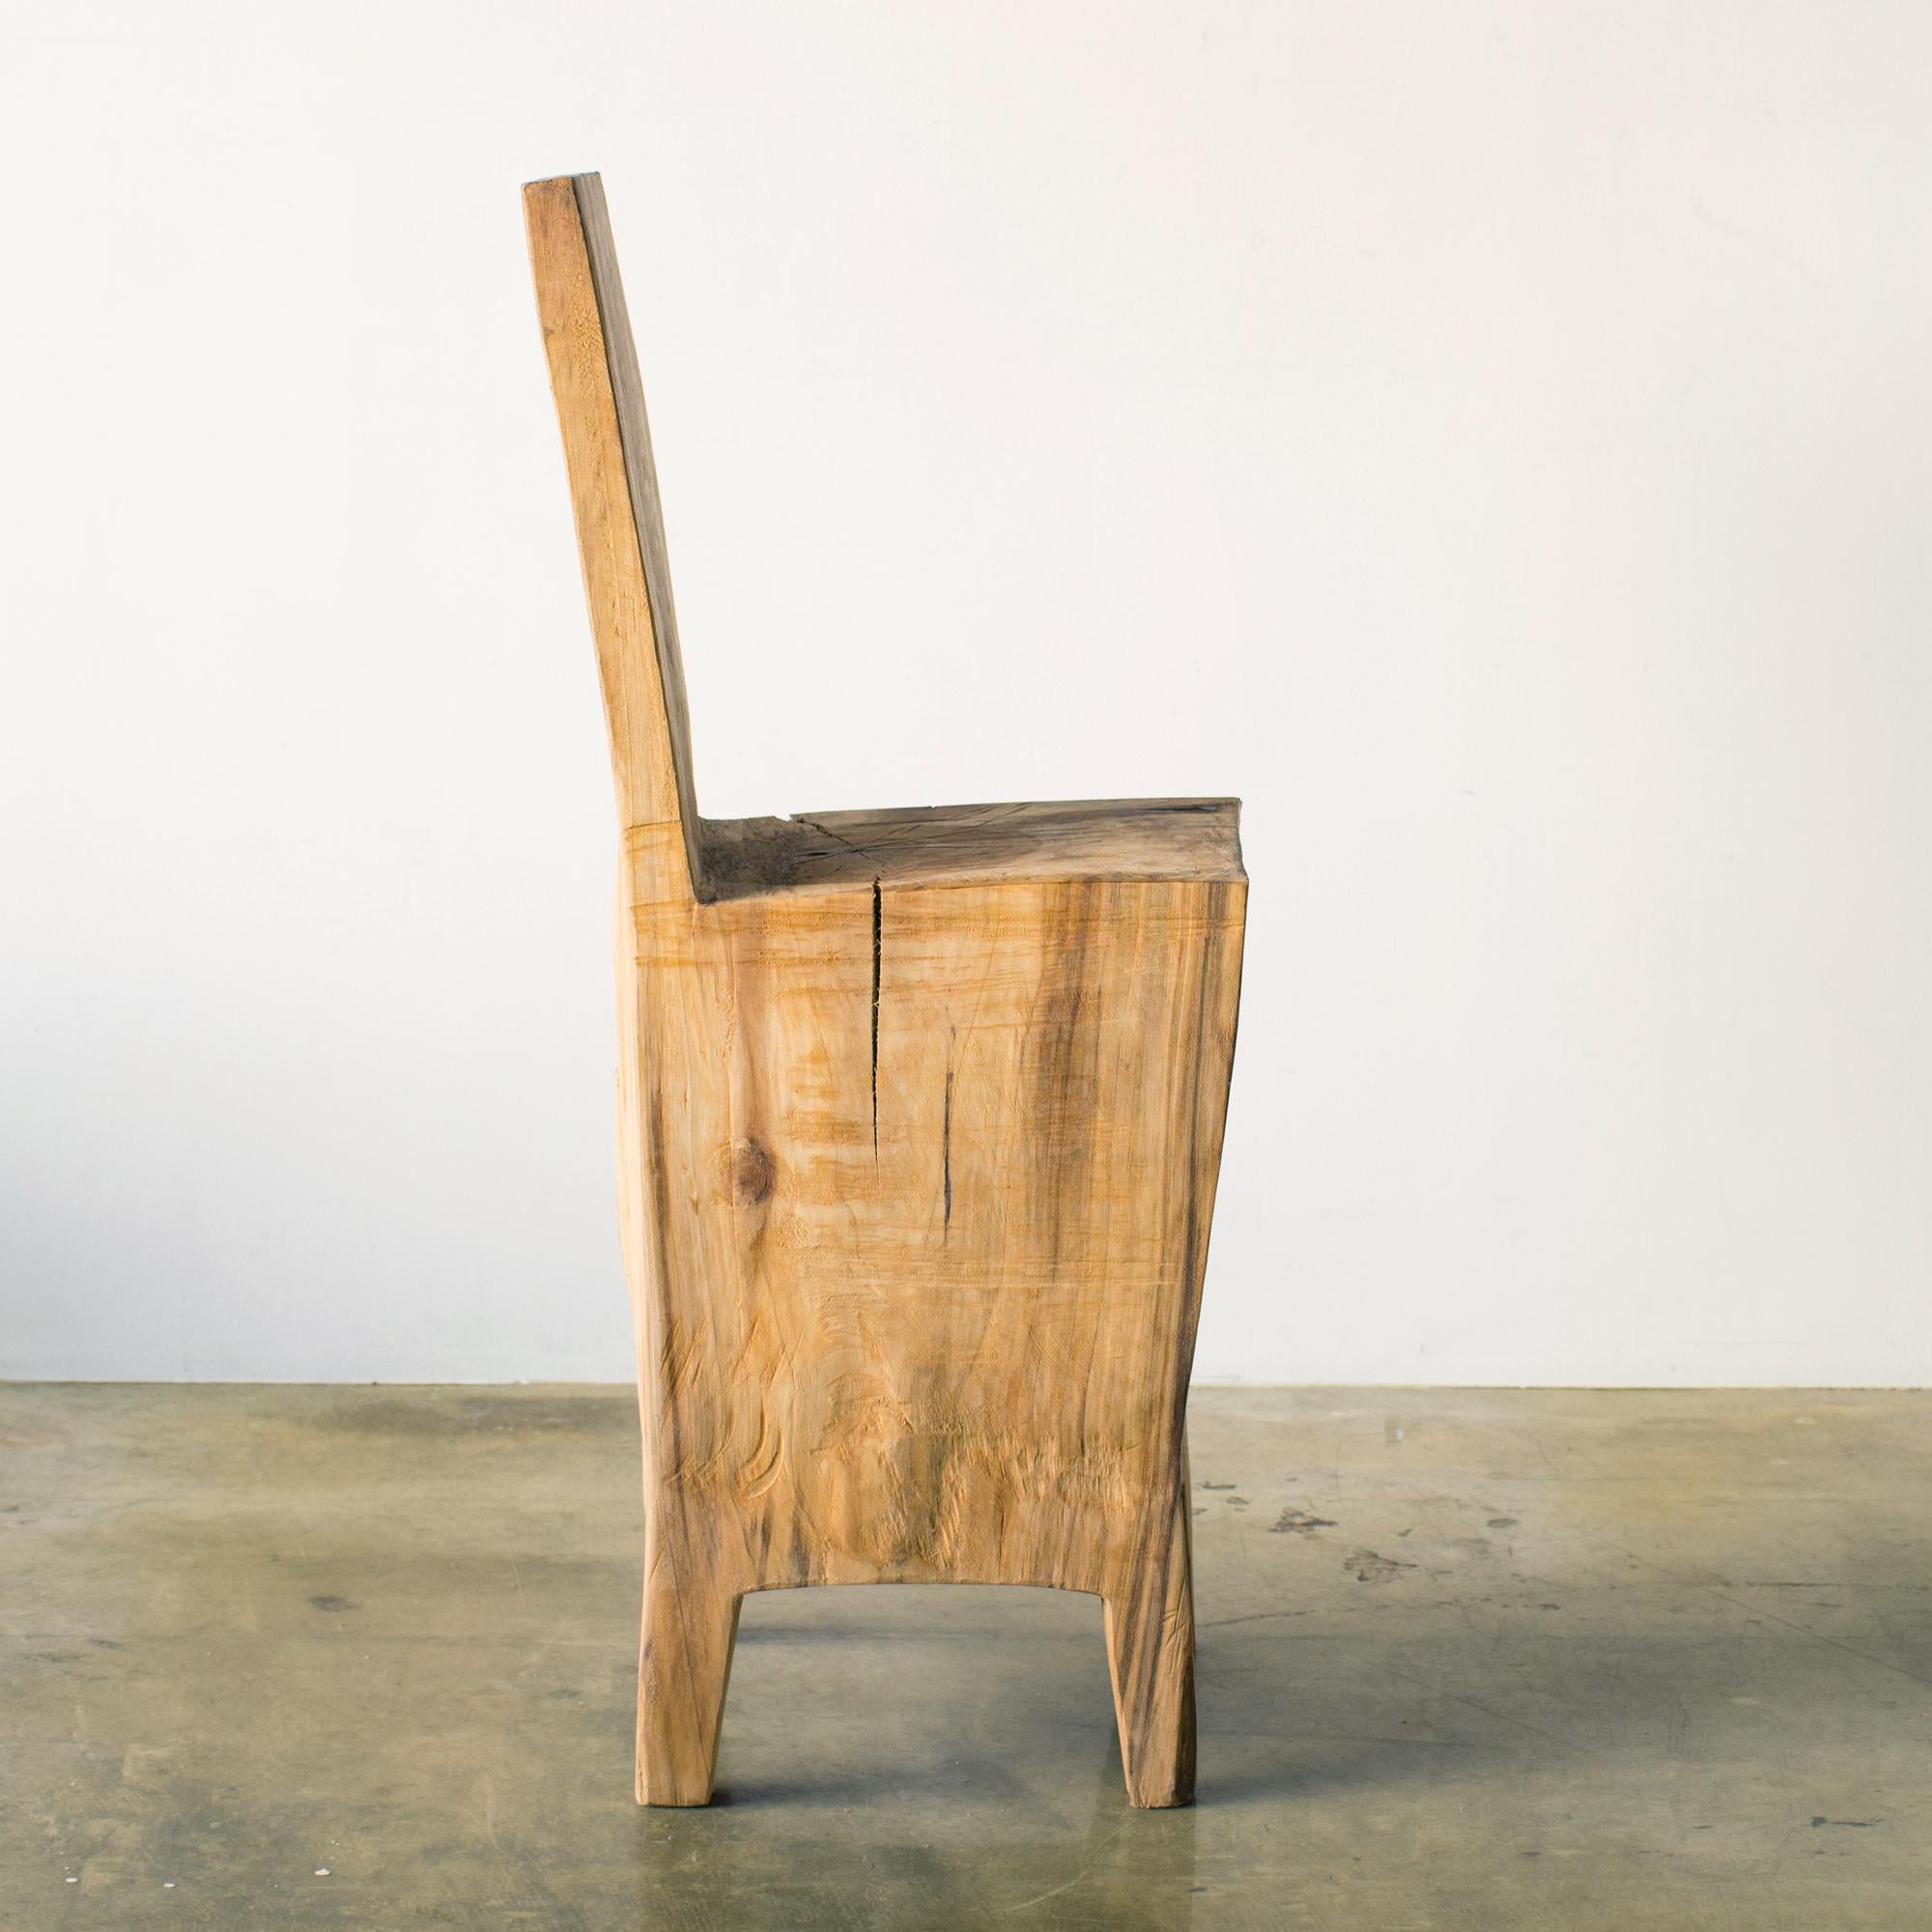 Japanese Hiroyuki Nishimura Sculptural Chair Abstract tribal style wild nature glamping For Sale